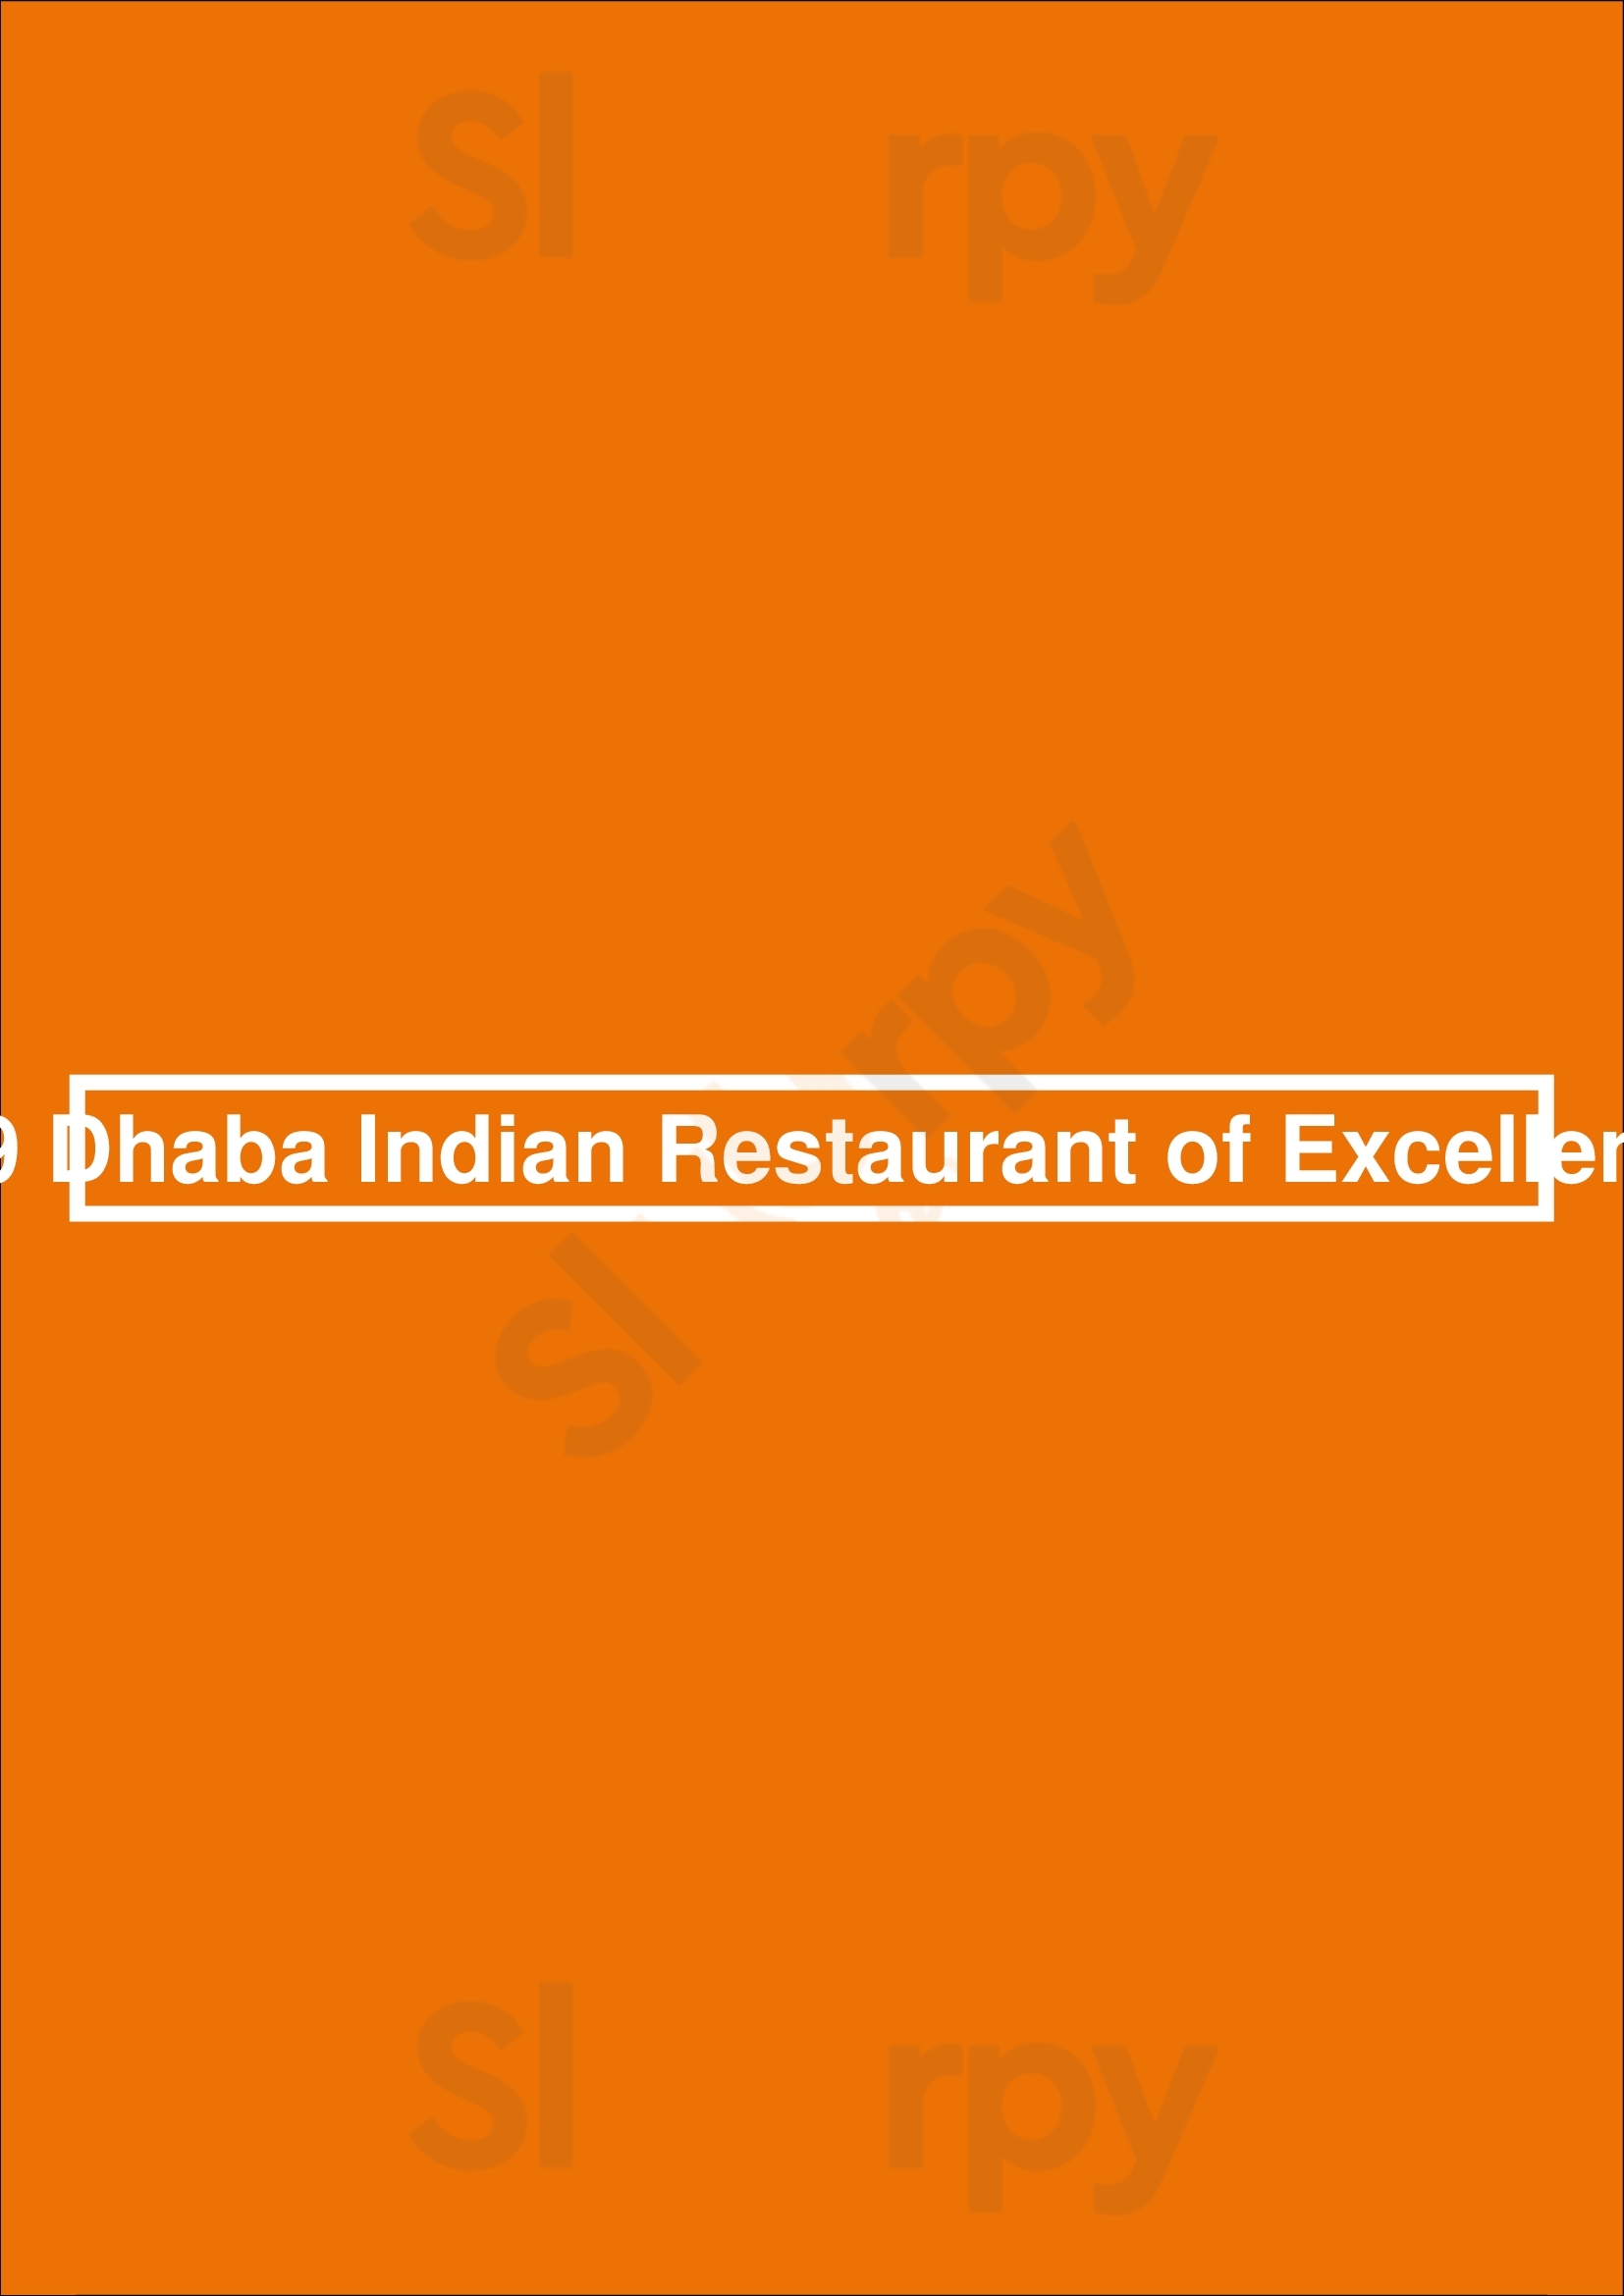 309 Dhaba Indian Restaurant Of Excellence Toronto Menu - 1